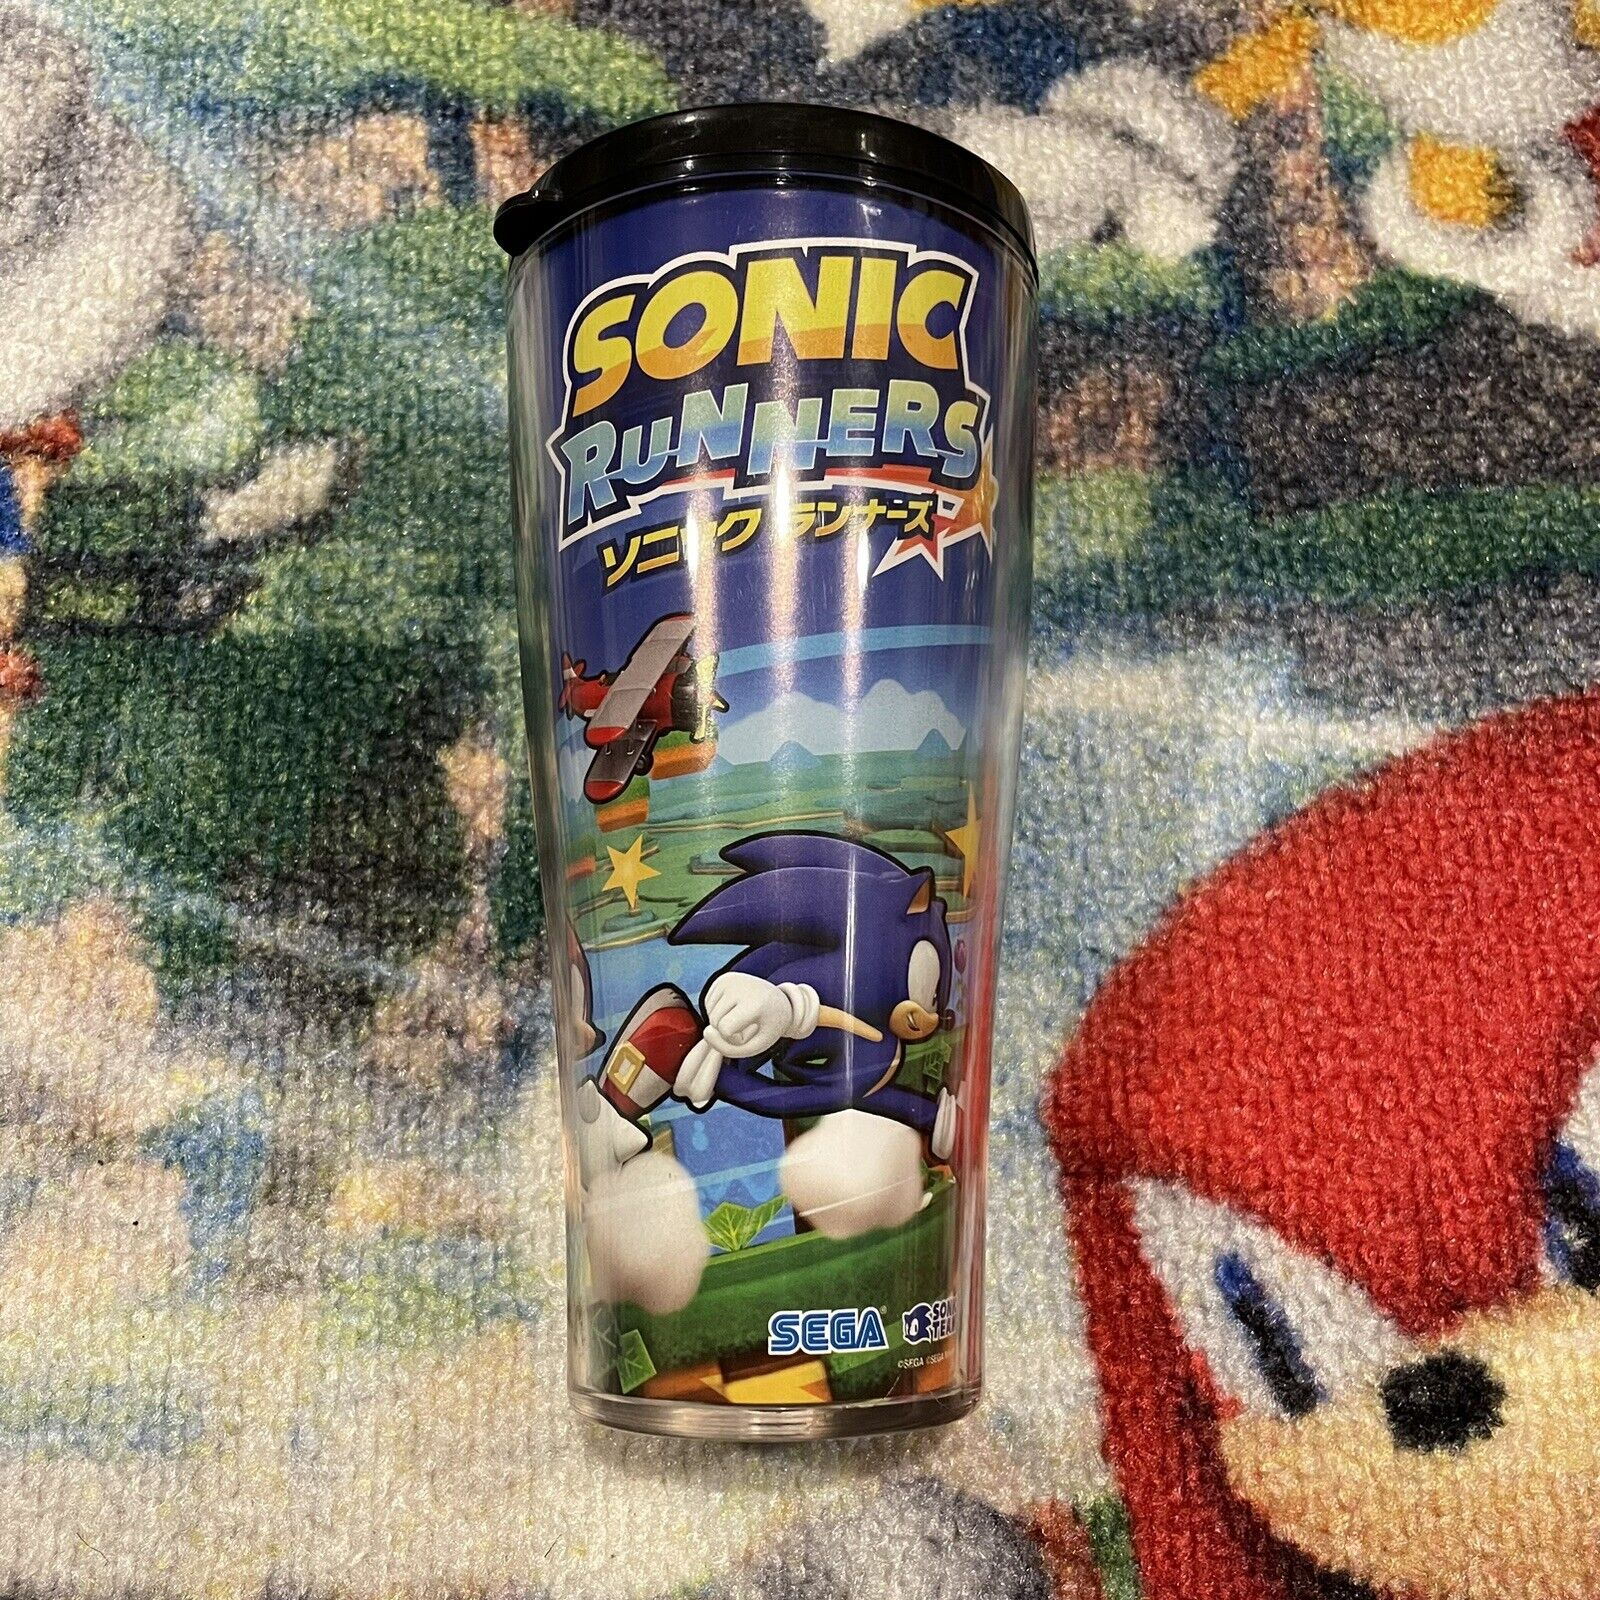 Sonic The Hedgehog Sonic Runners Promo Tumbler Cup RARE Japan 2015